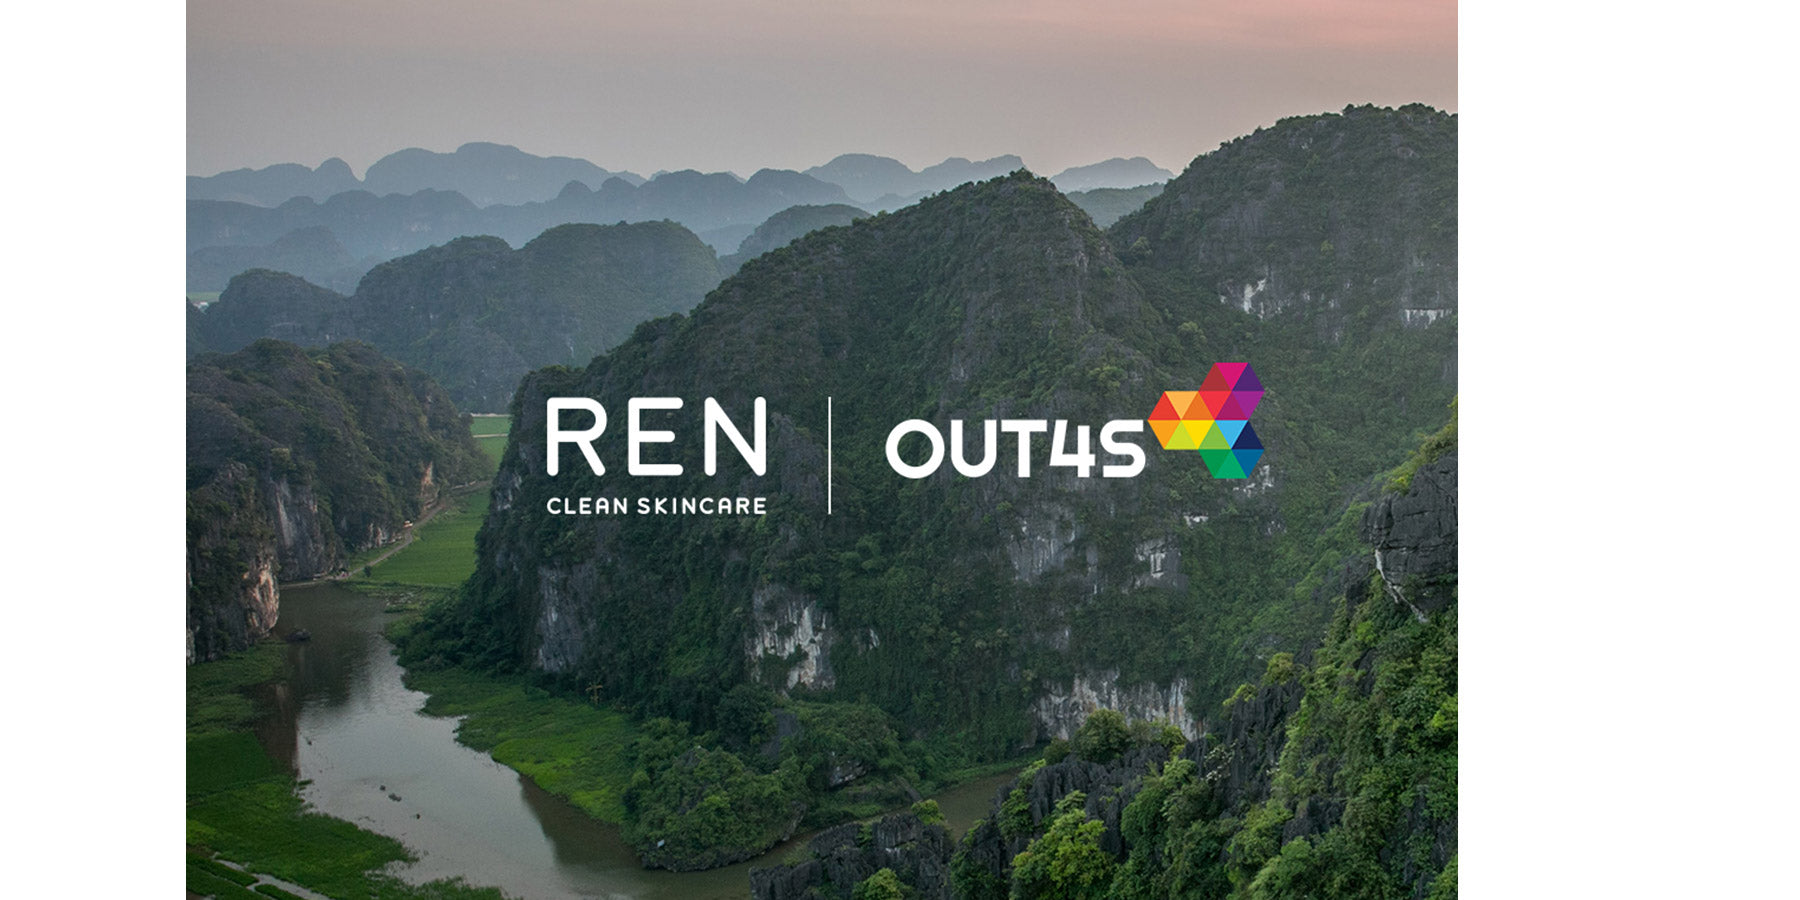 REN x OUT for Sustainability